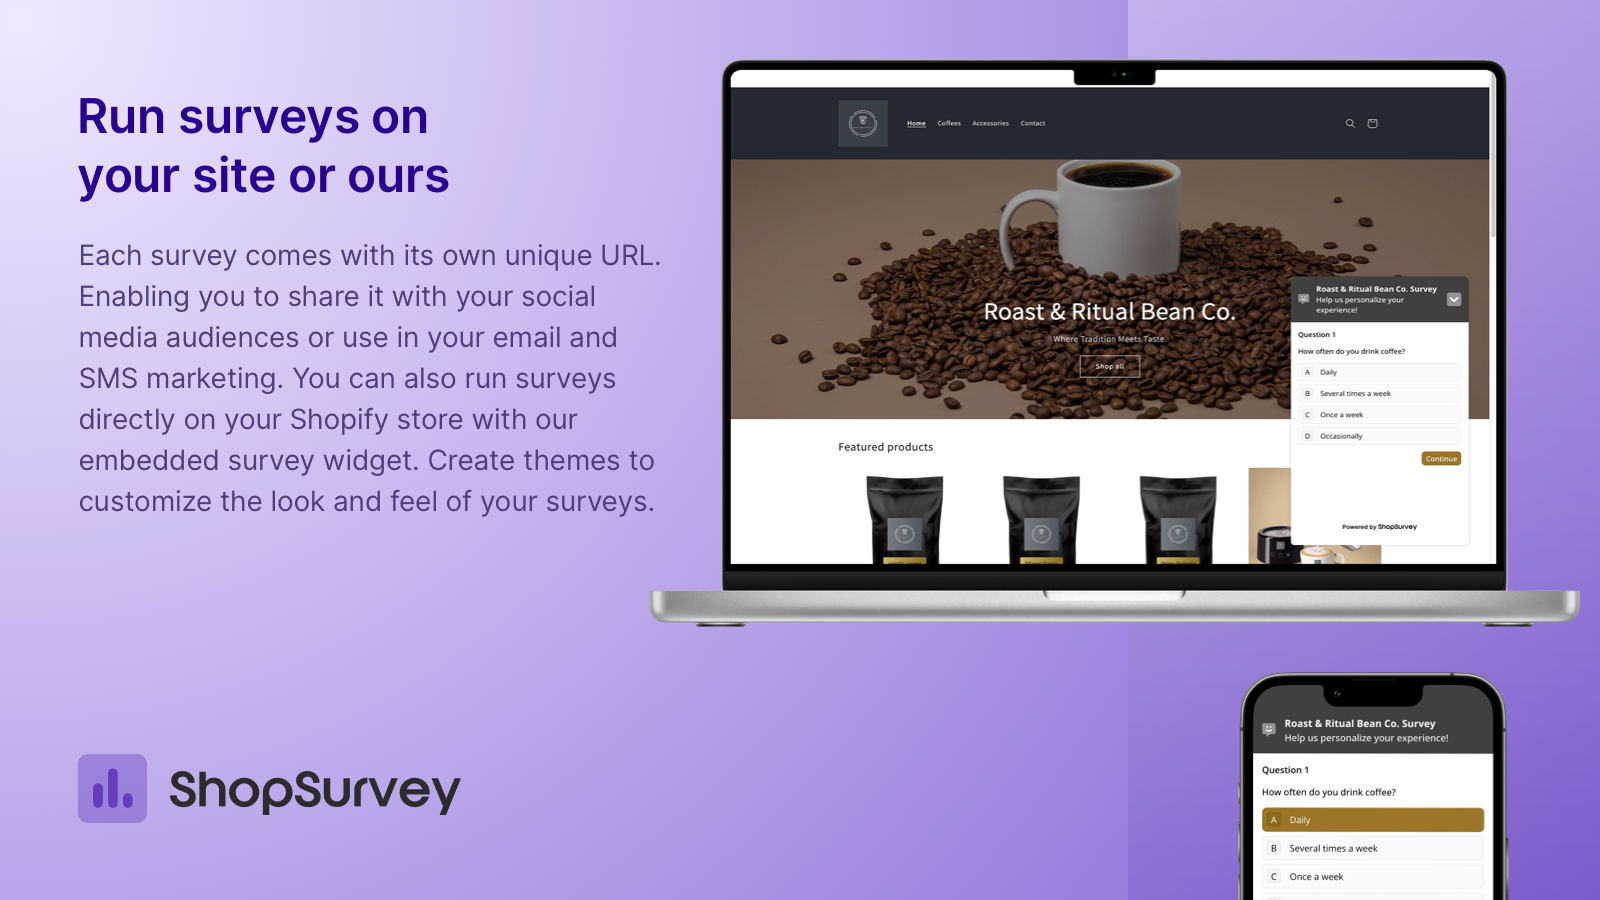 Run surveys on your landing pages or from hosted forms